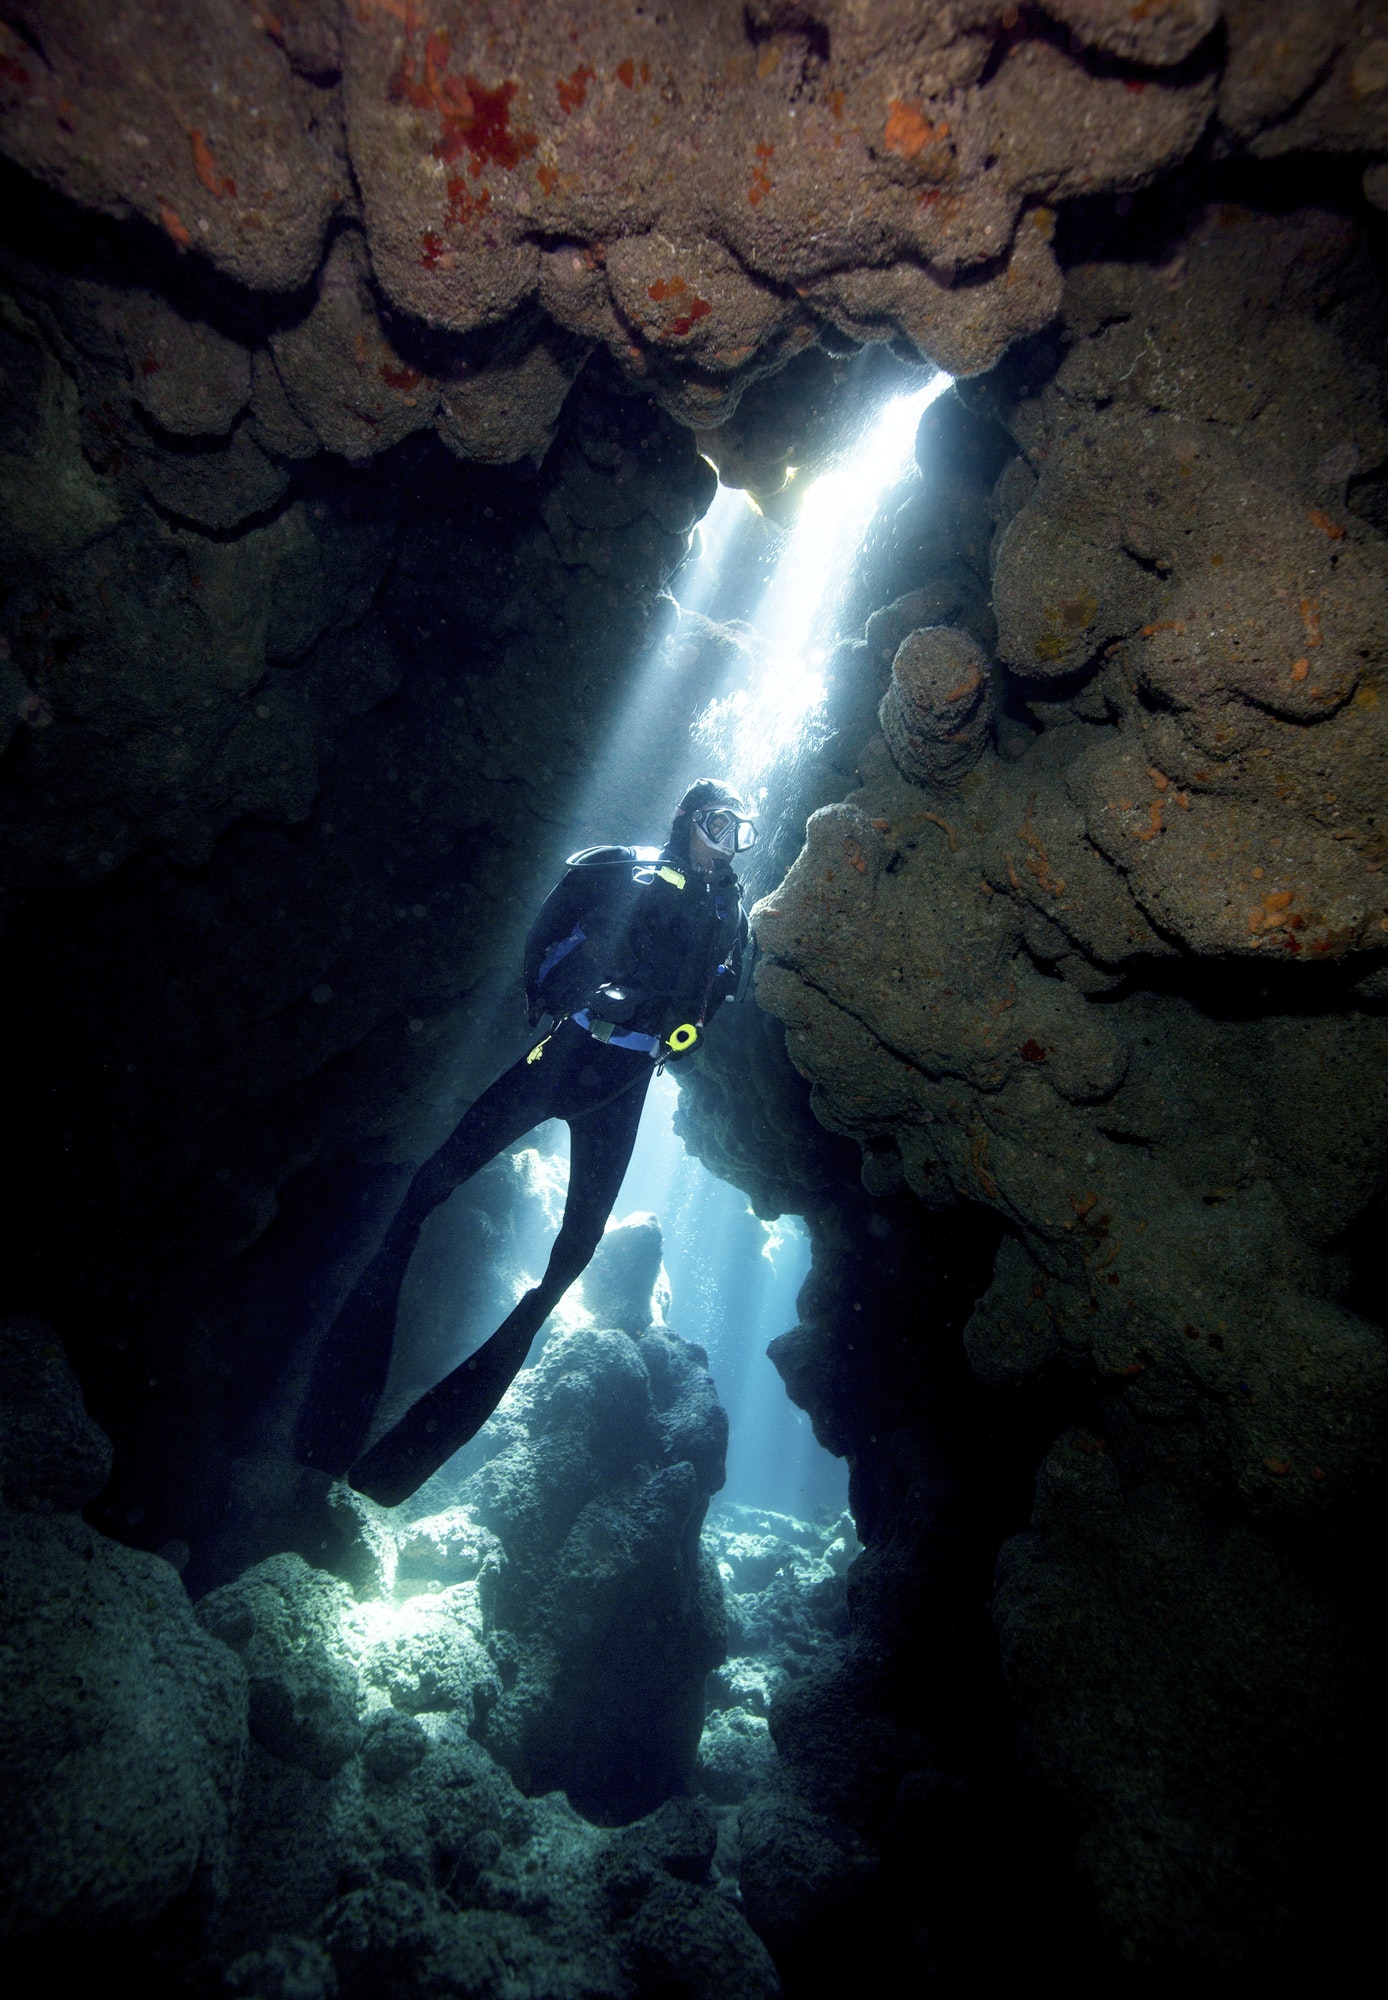 Crepuscular rays illuminate a scuba diver at Coral Caverns dive site.,Diver in Reef Crevice.